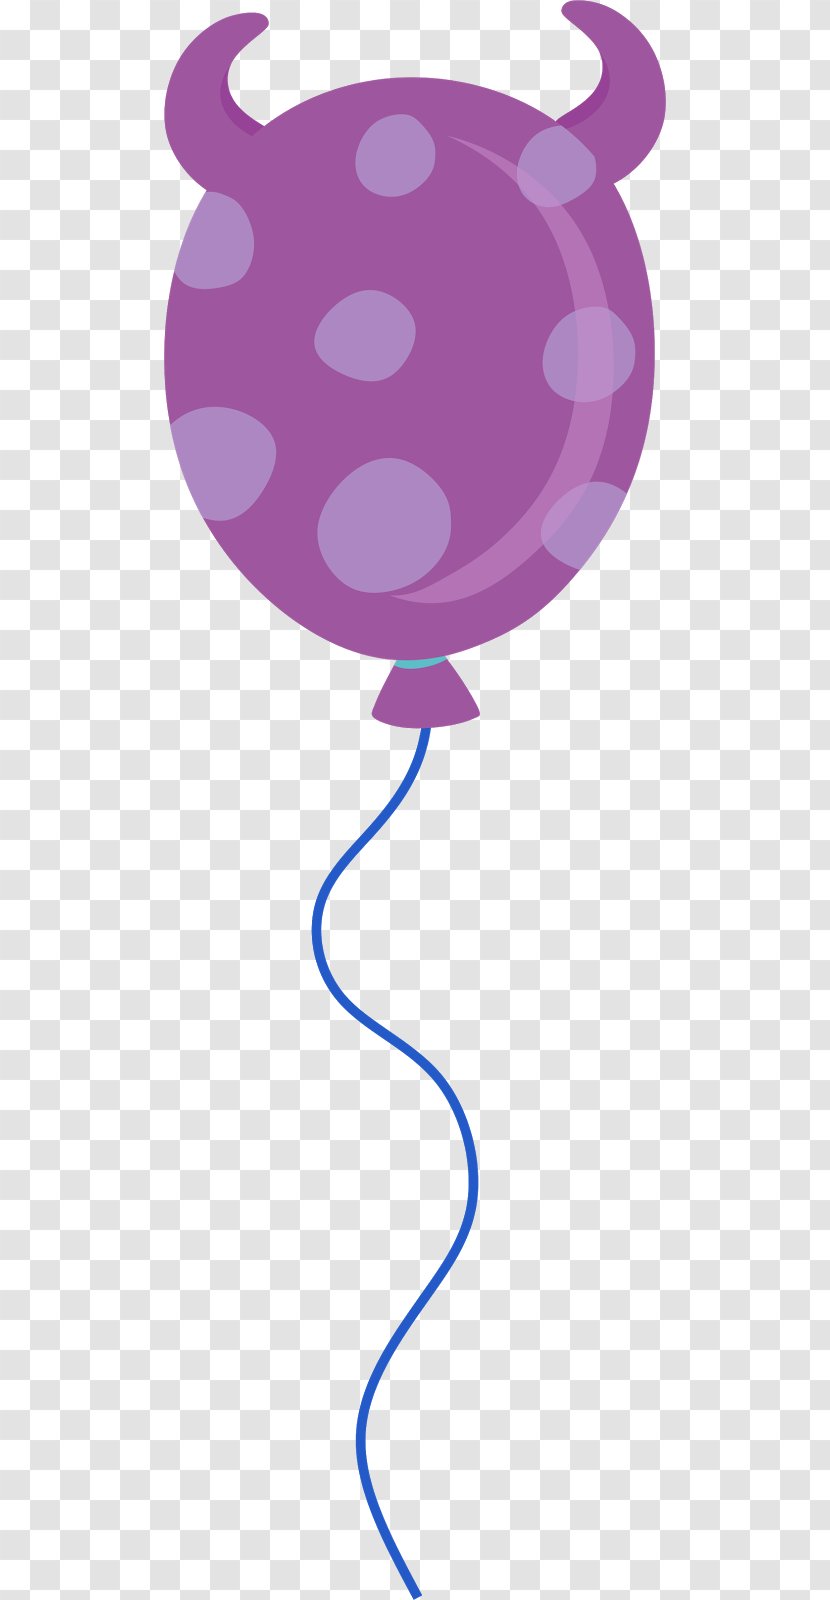 Mike Wazowski Balloon Boo Monsters, Inc. Clip Art - Birthday - Monsters Inc Transparent PNG